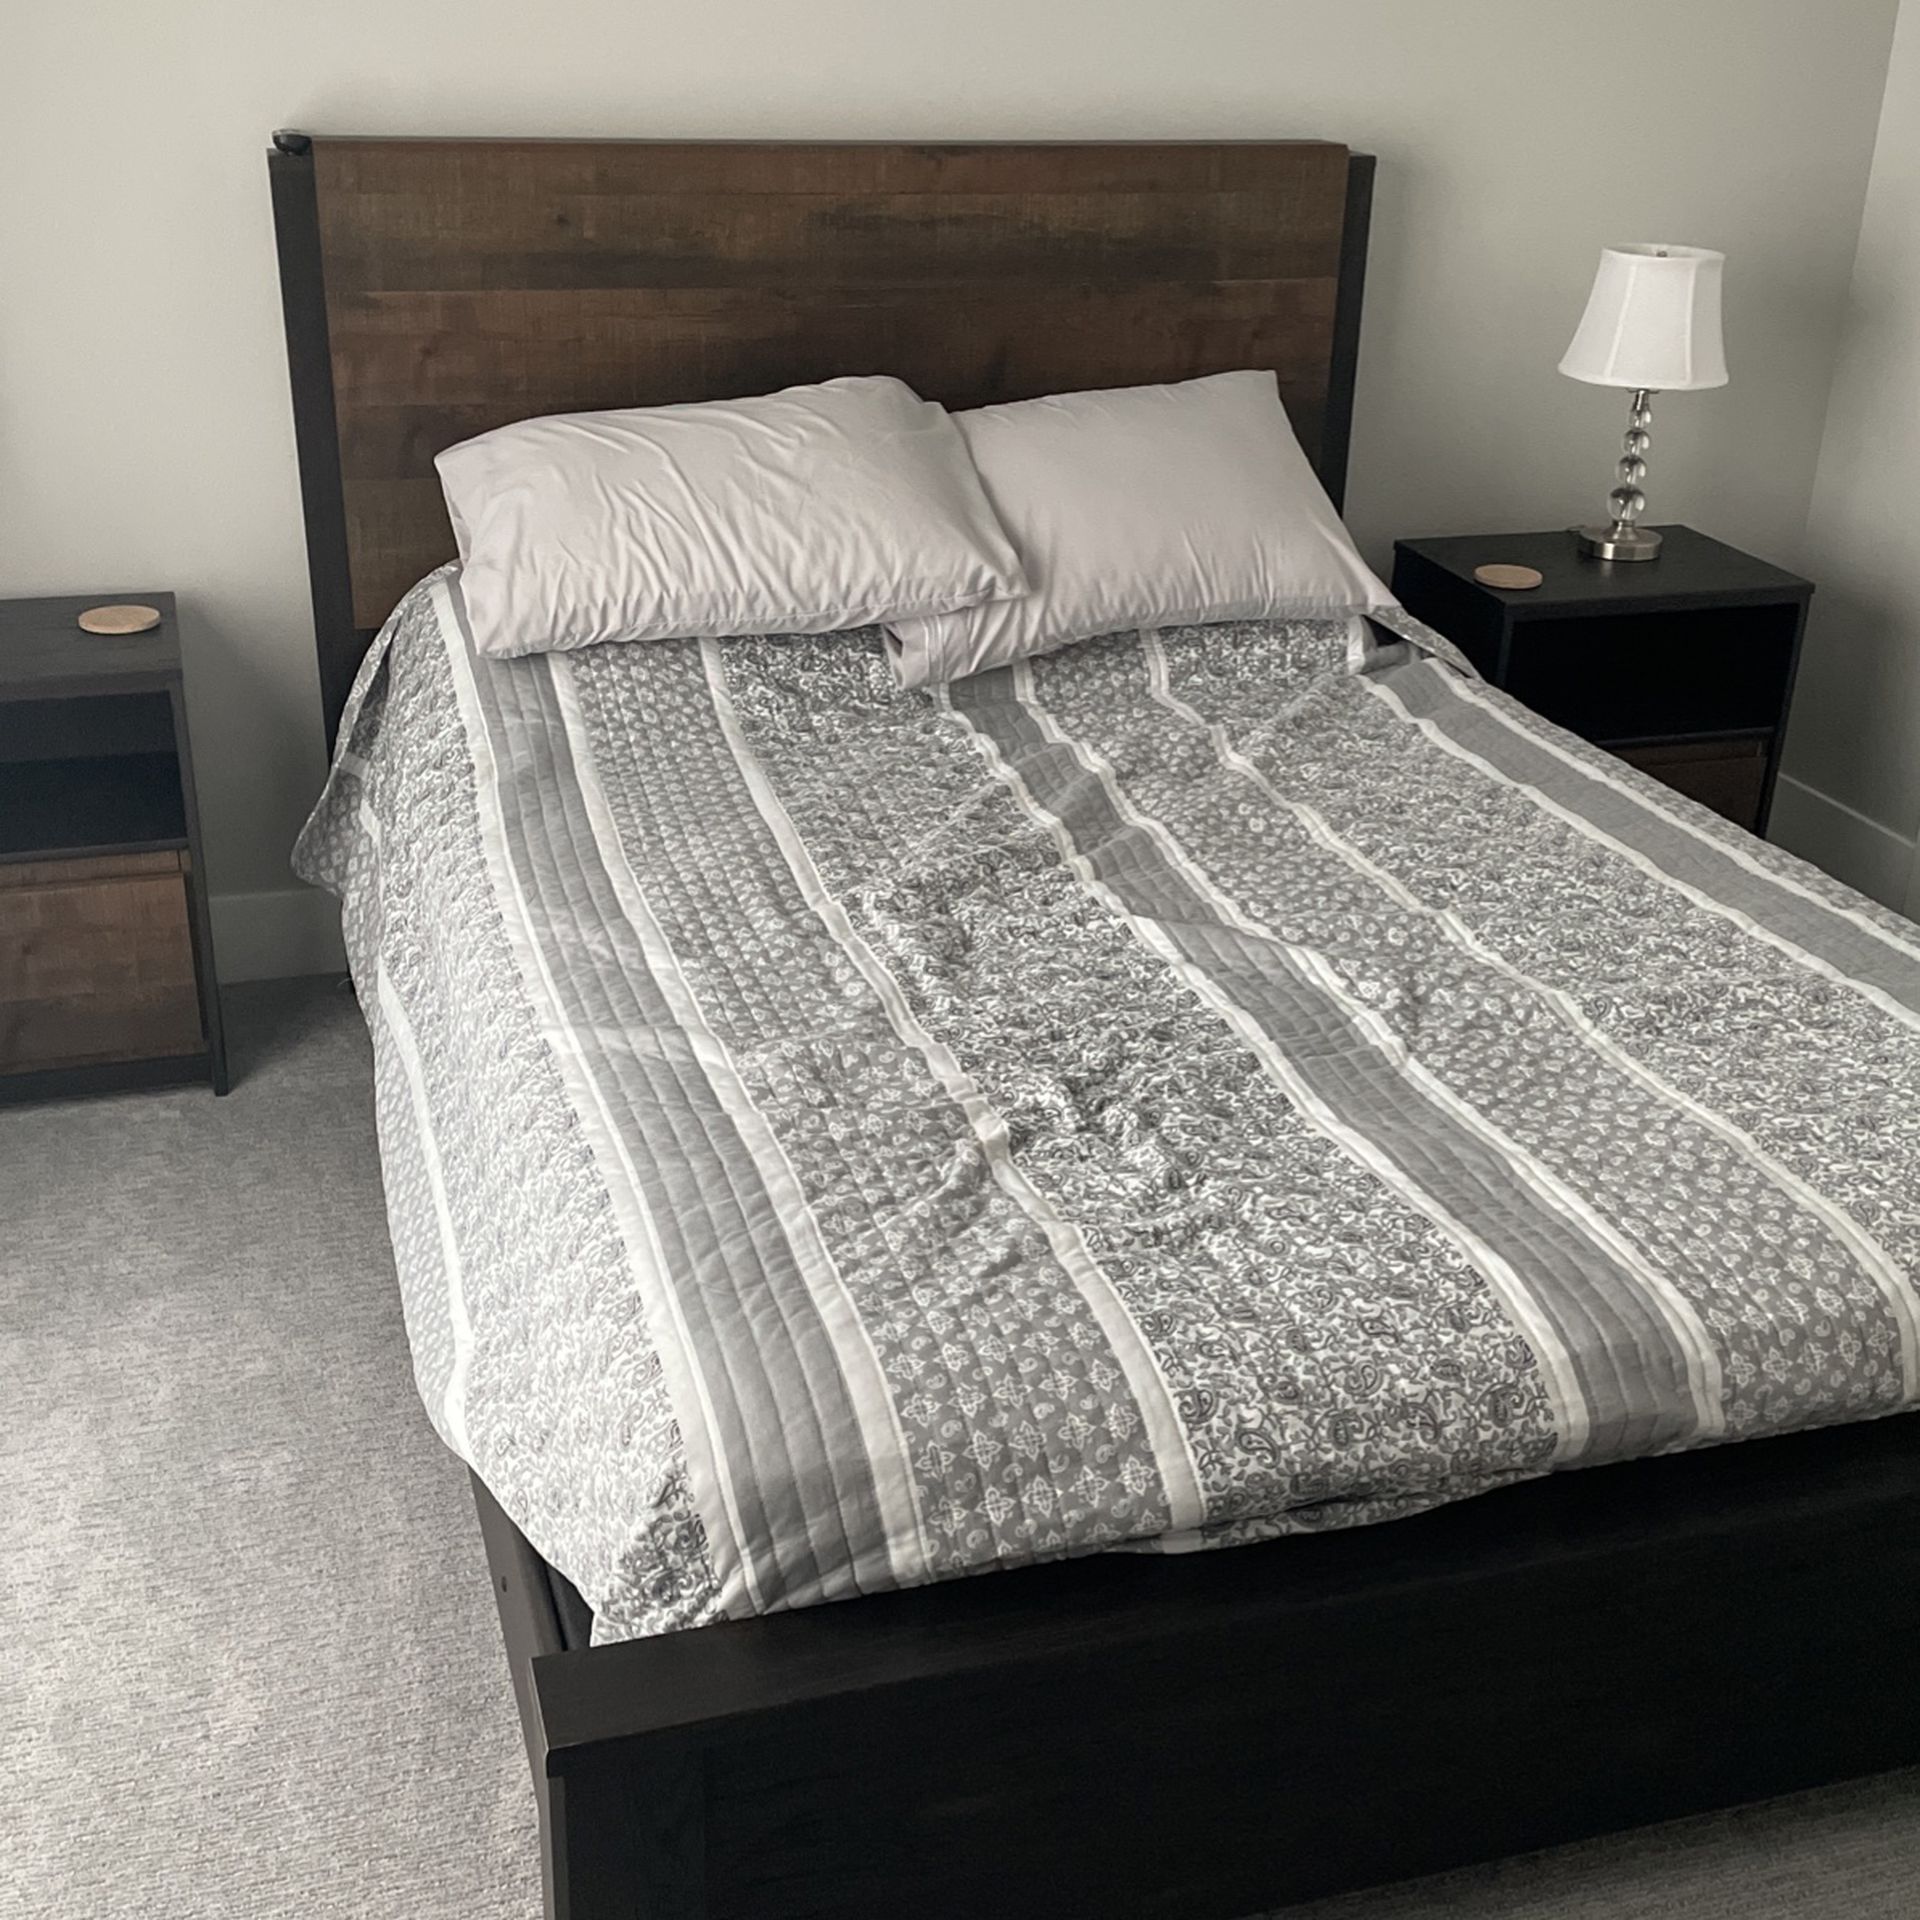 Queen Size Bed And Dual End Tables 